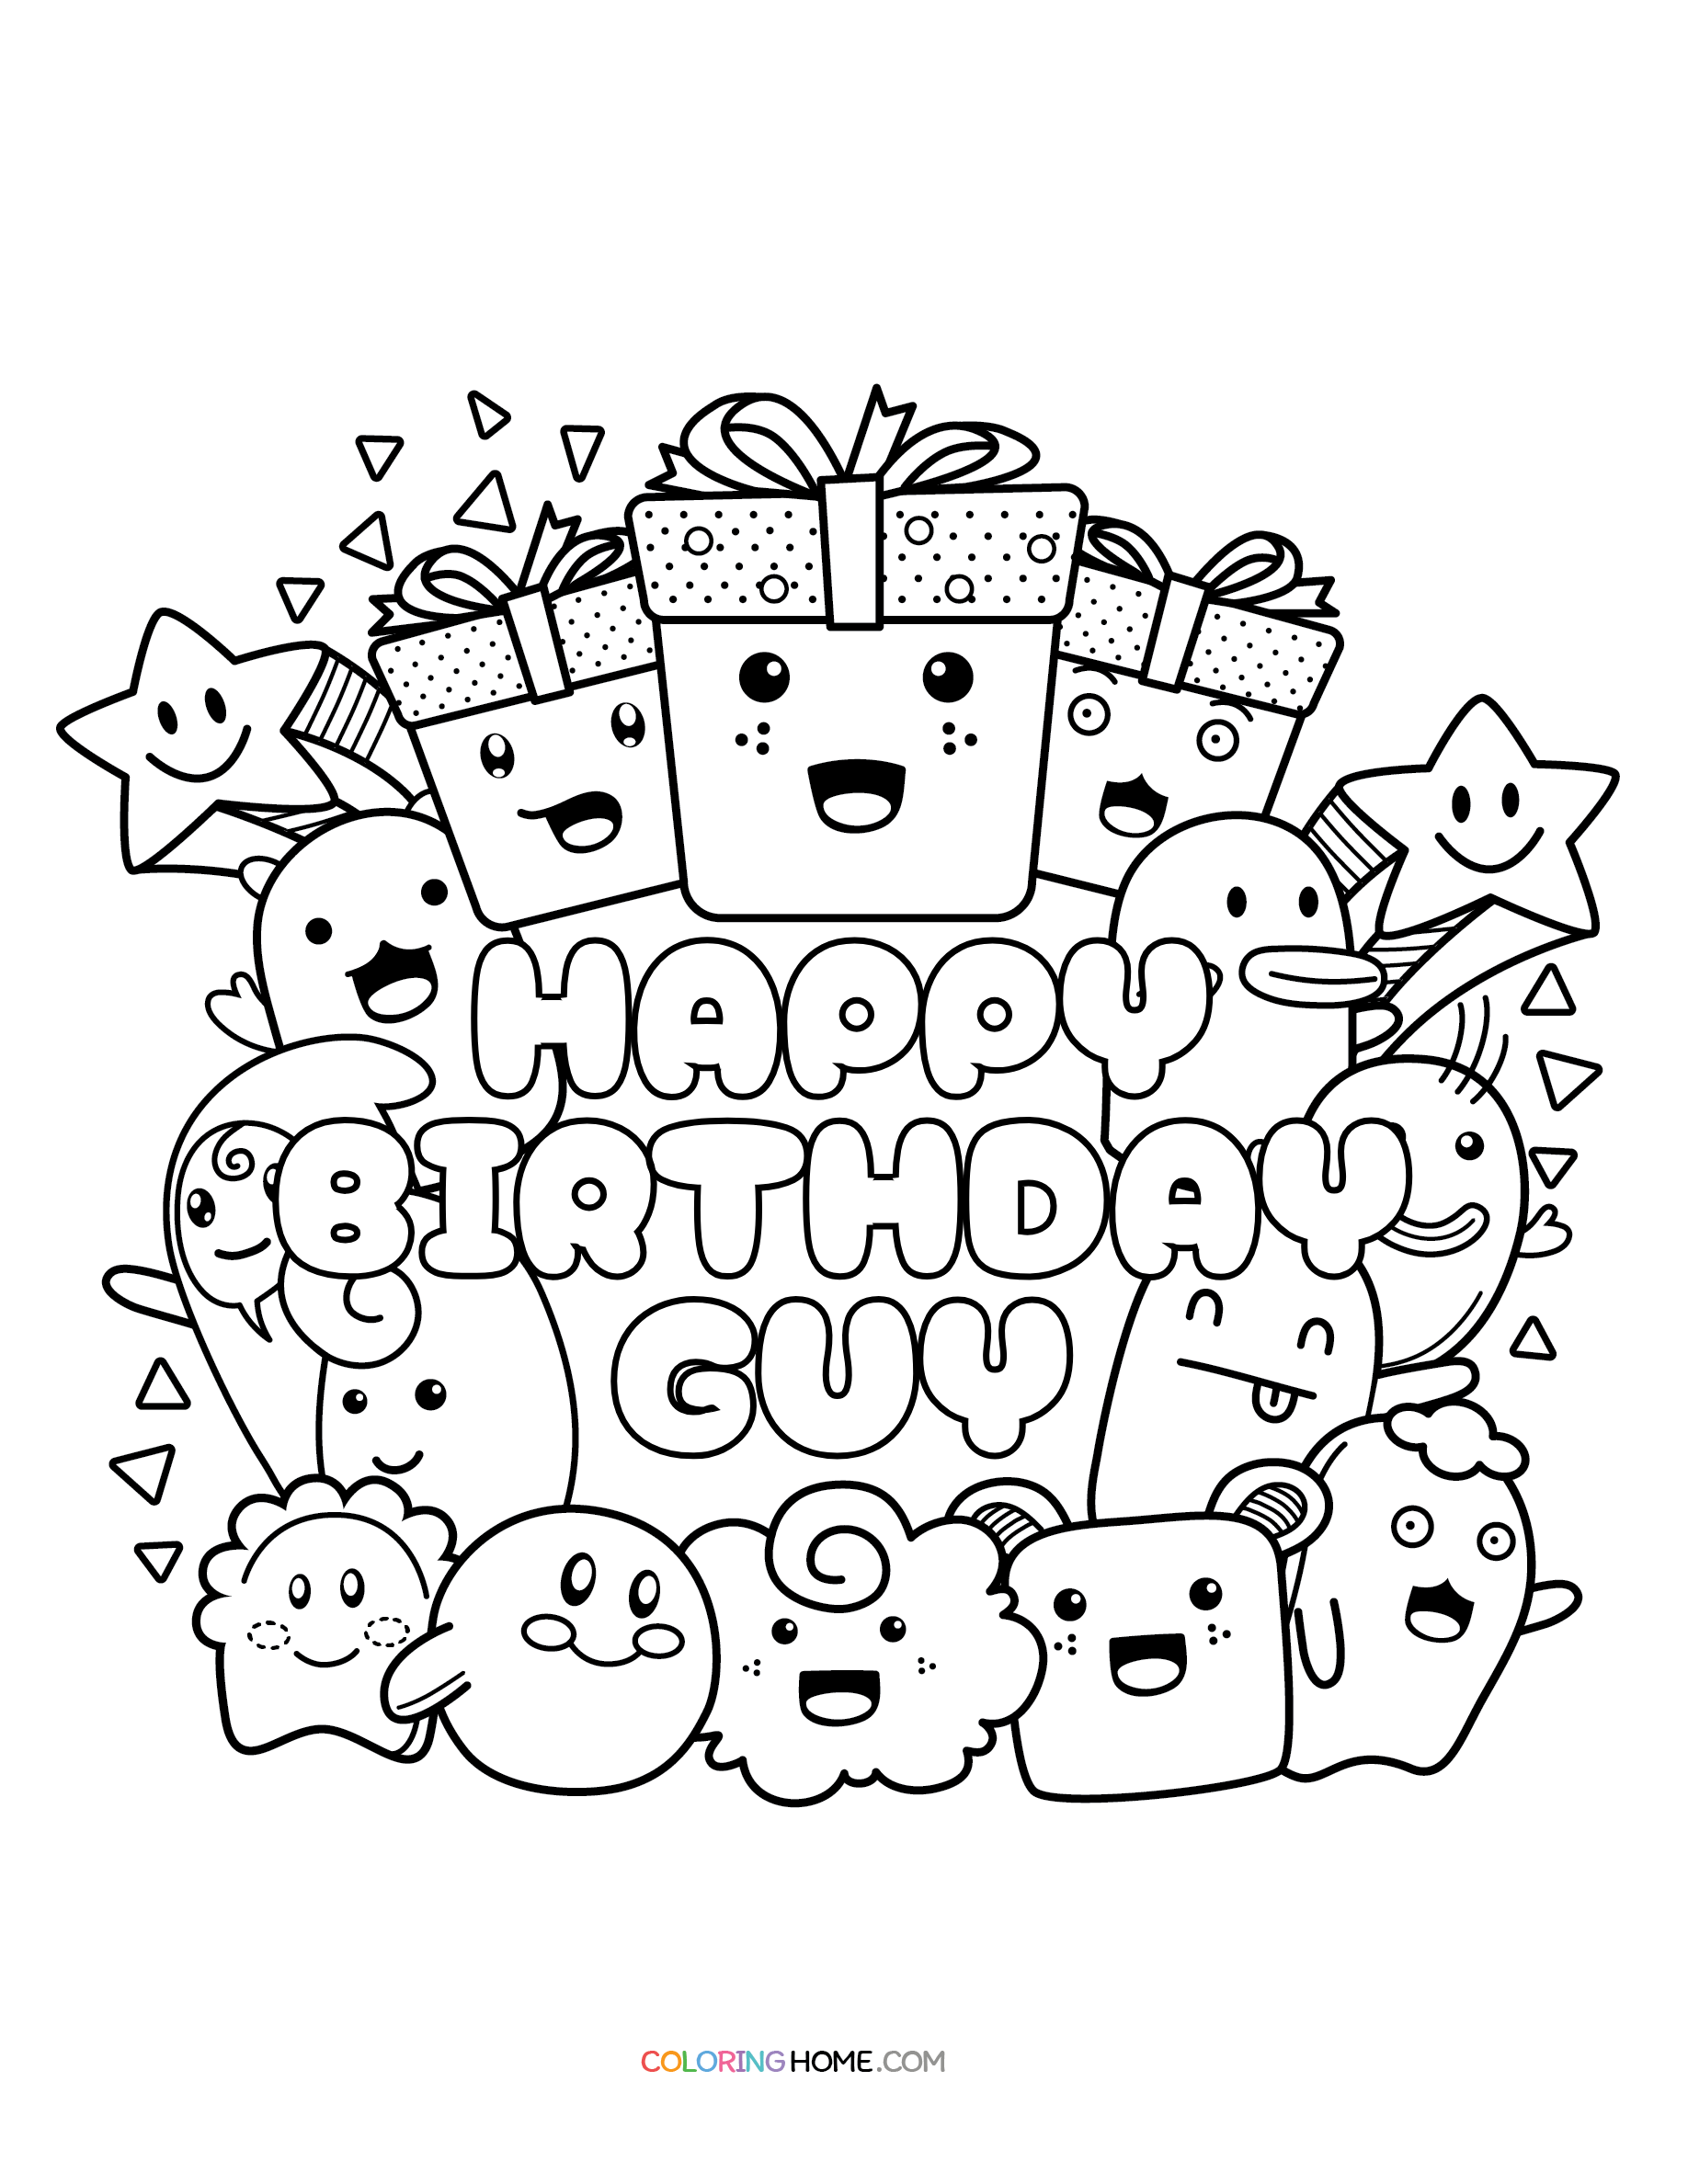 Happy Birthday Guy coloring page